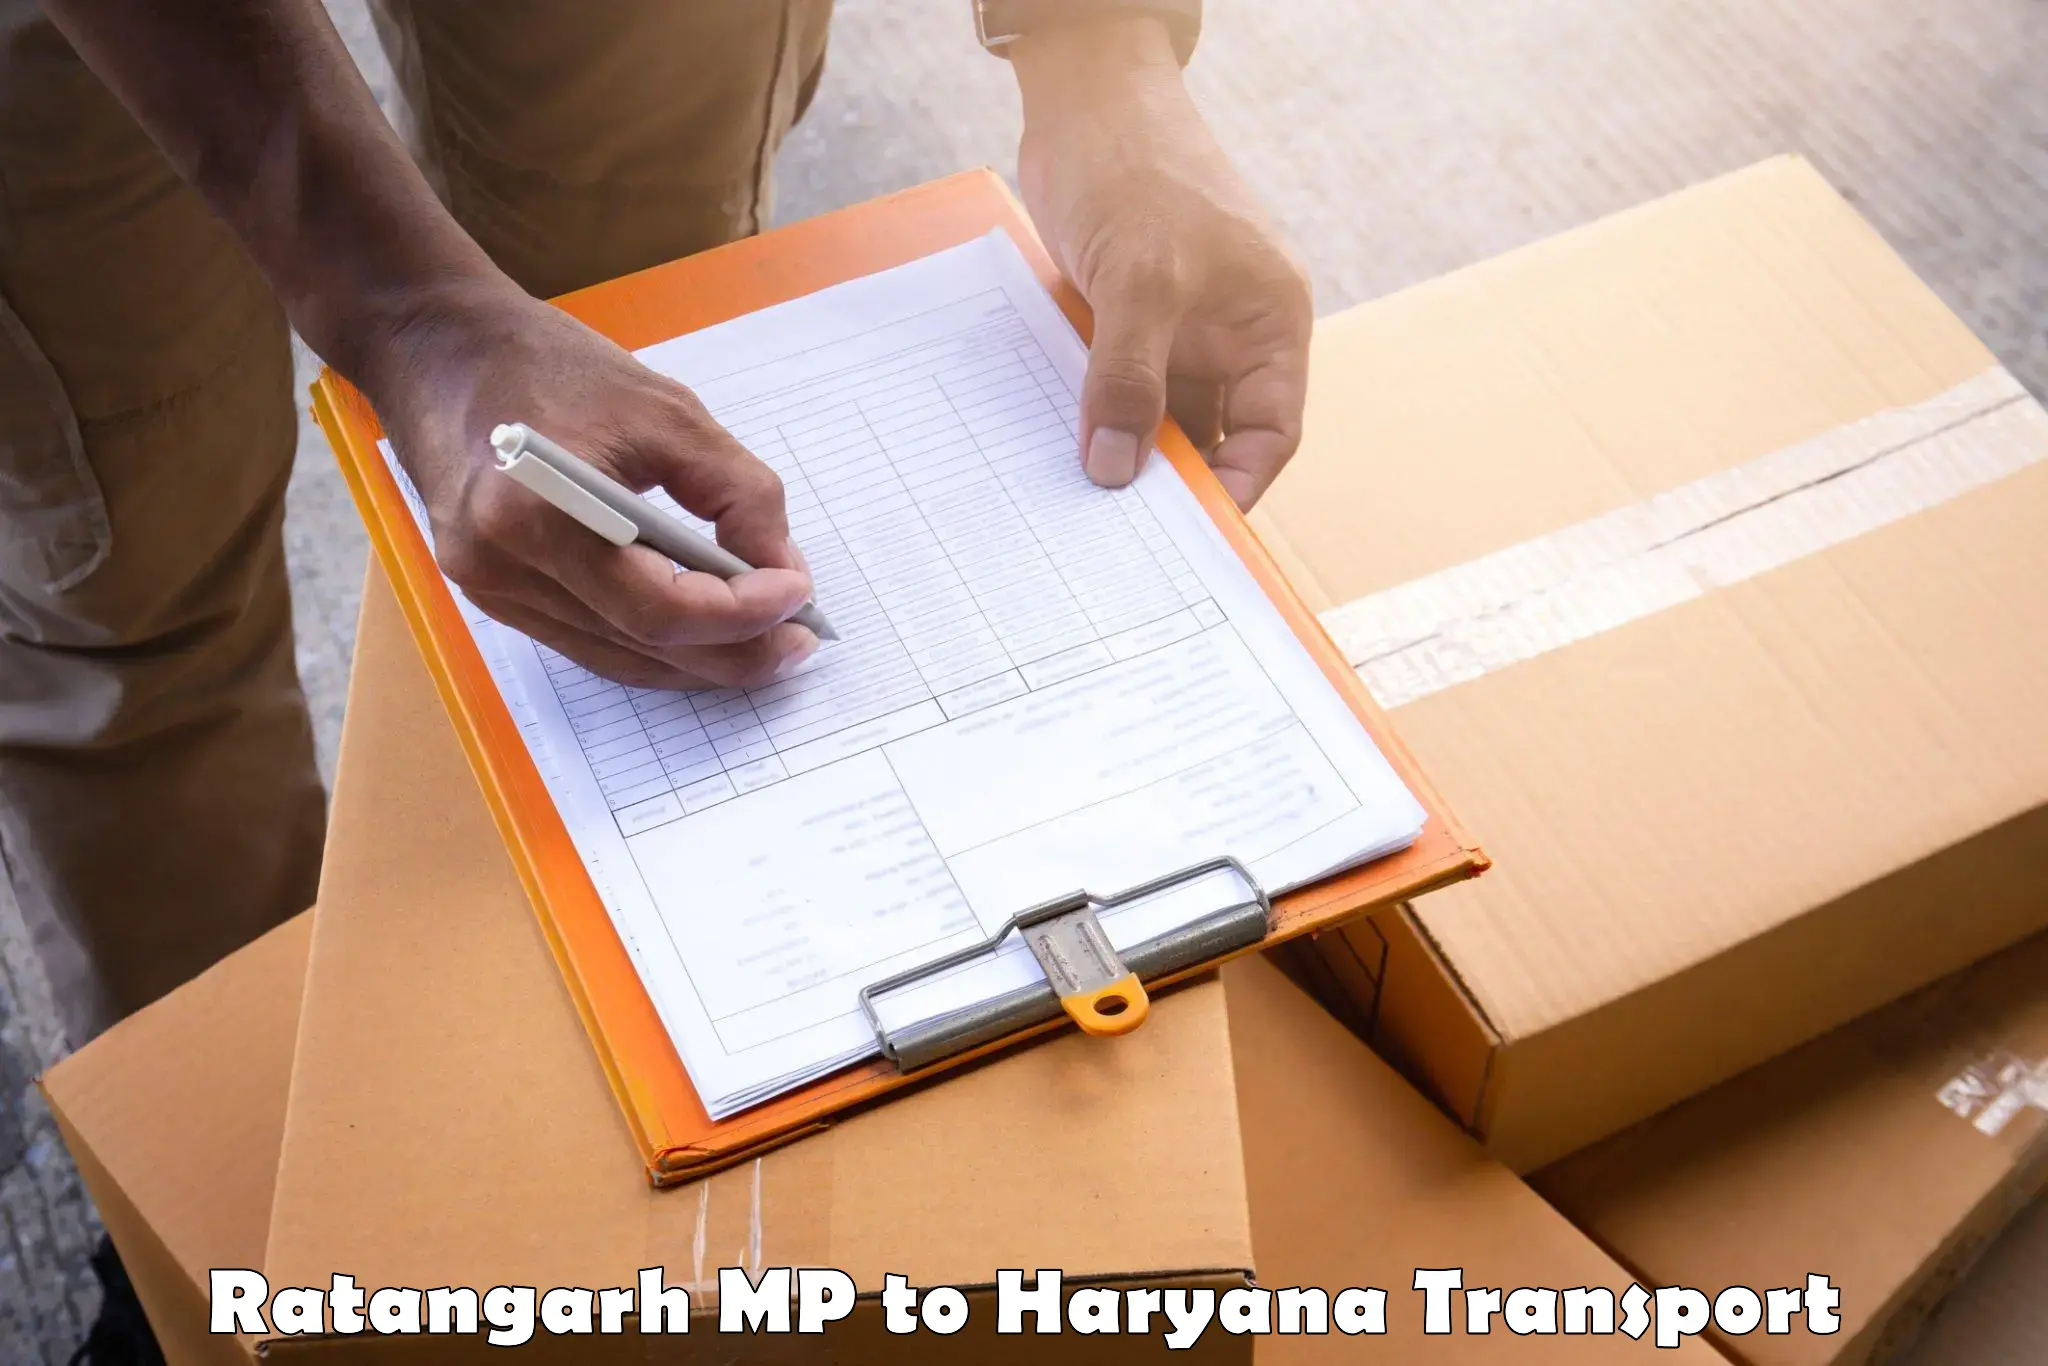 Shipping services Ratangarh MP to Sonipat